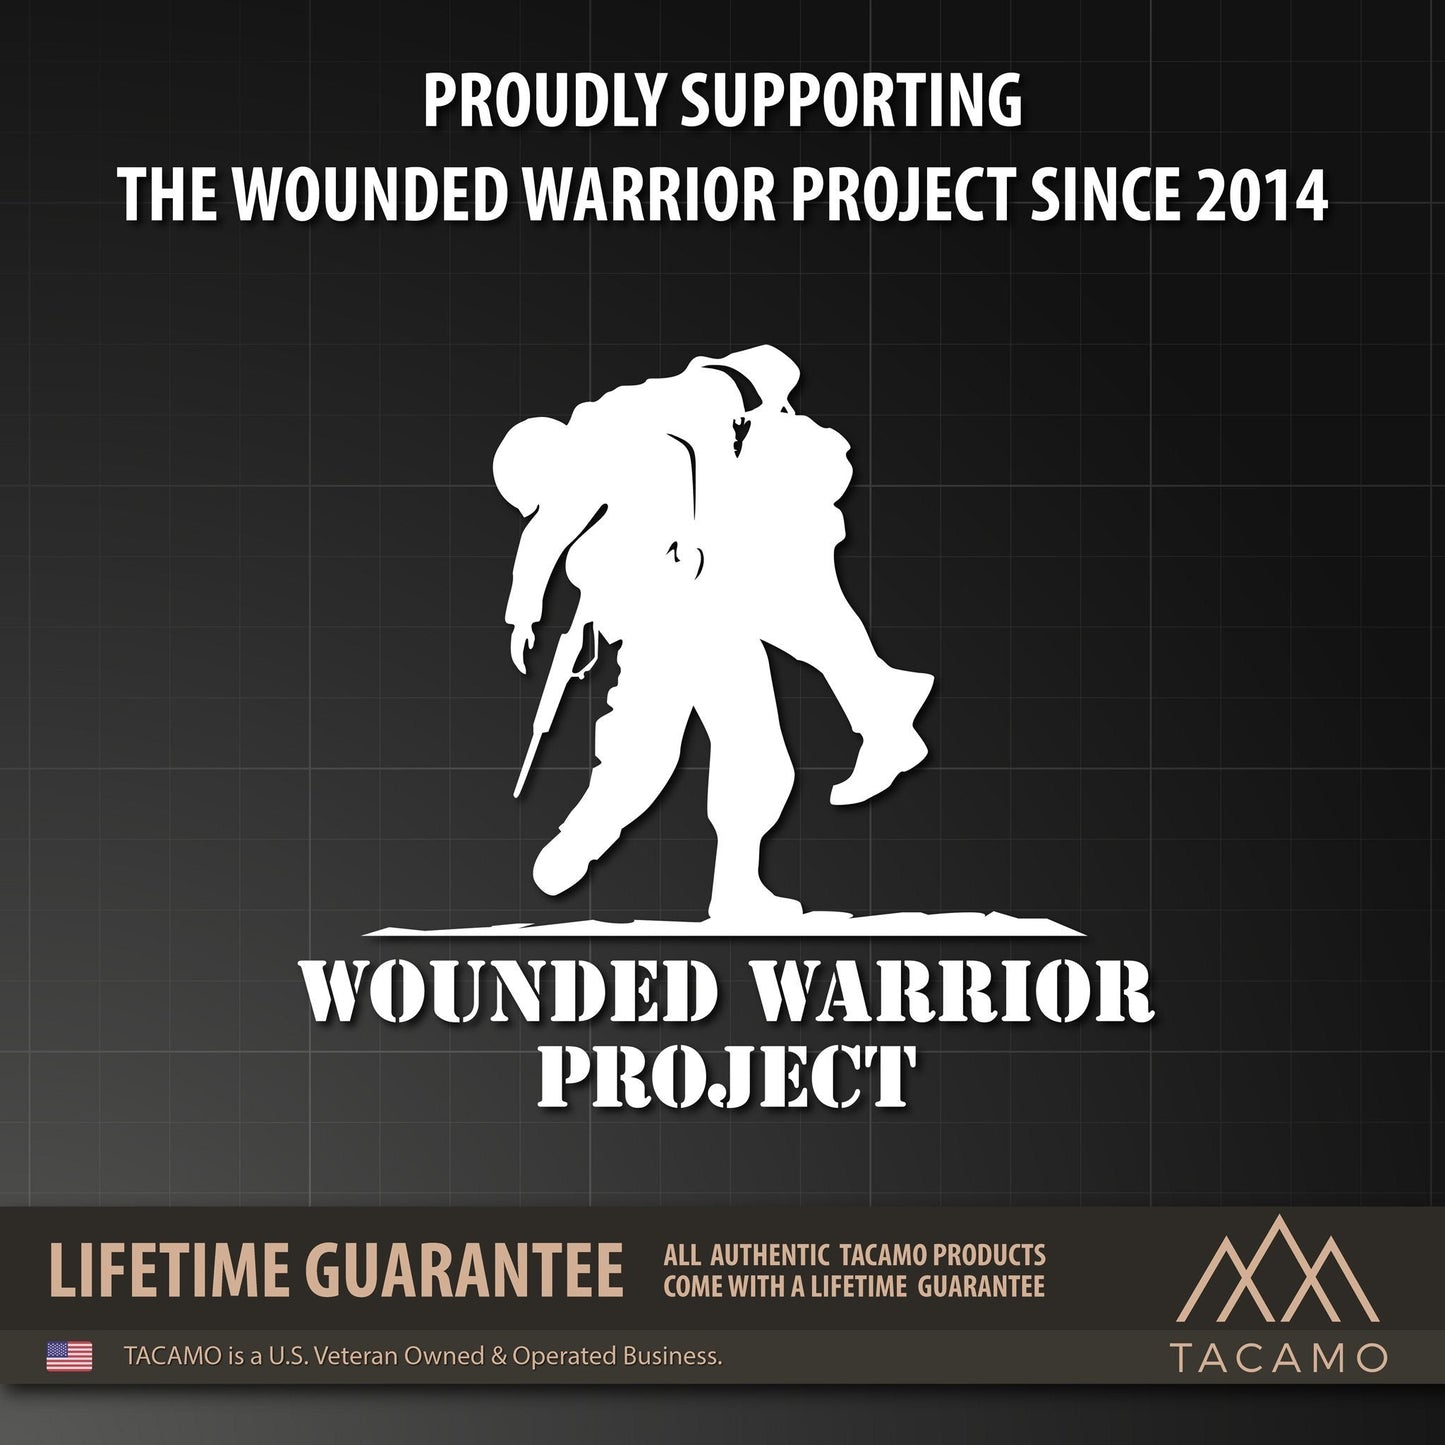 Description of Wounded Warrior Project support by purchasing a backpack